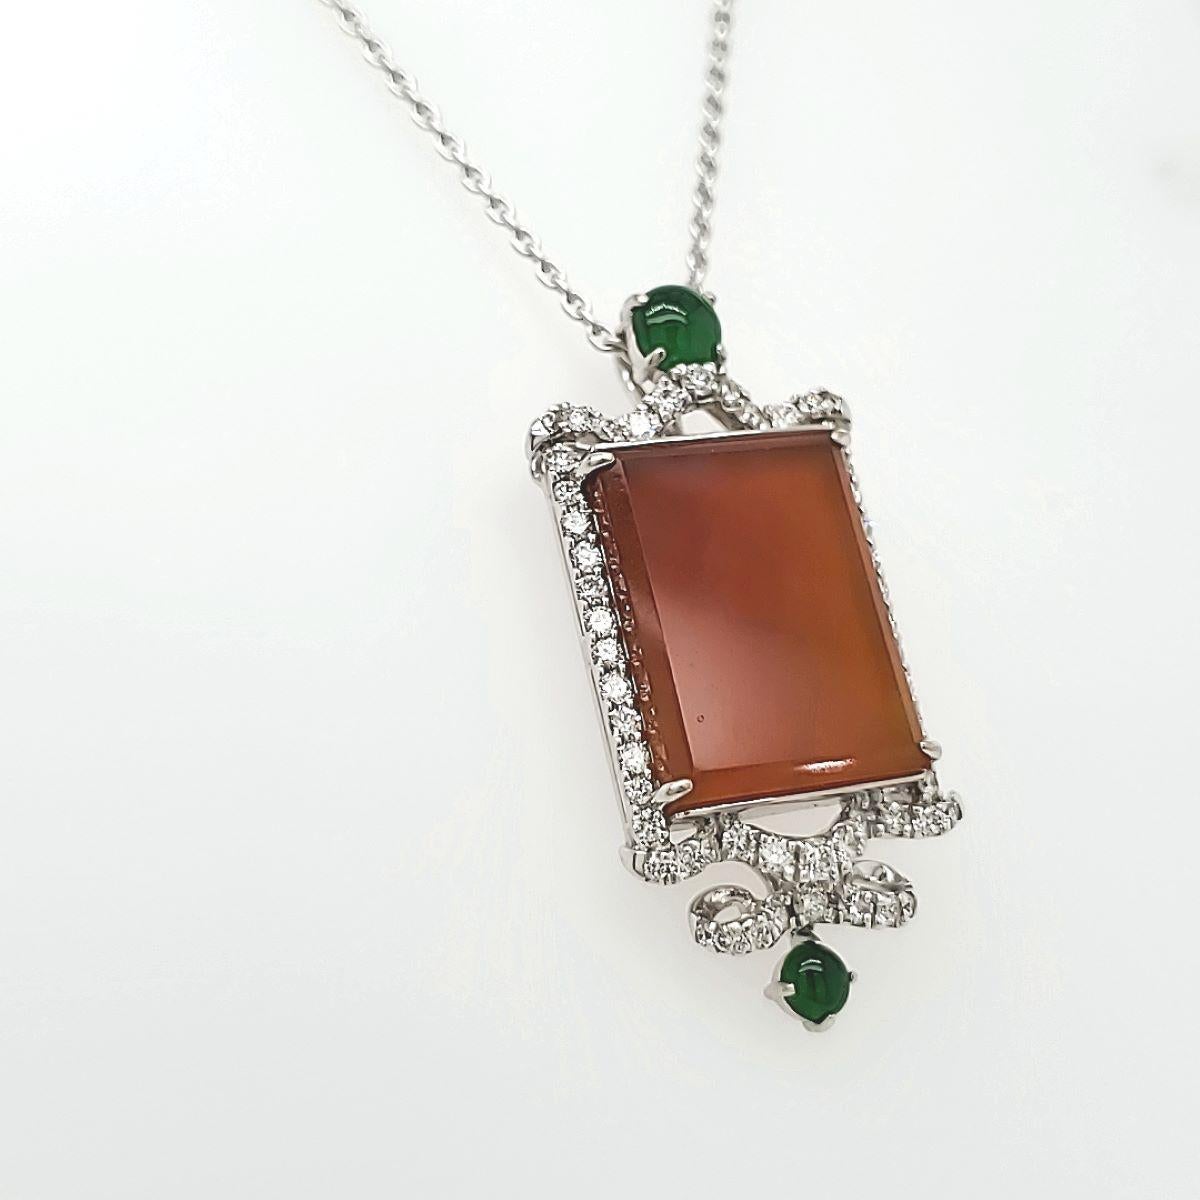 Dive into the rich symbolism of red jade, known for promoting vitality and passion. 

This pendant features a captivating rectangular red jade.

It comes with a certificate from the Hong Kong Gems Lab, ensuring its authenticity as the natural color